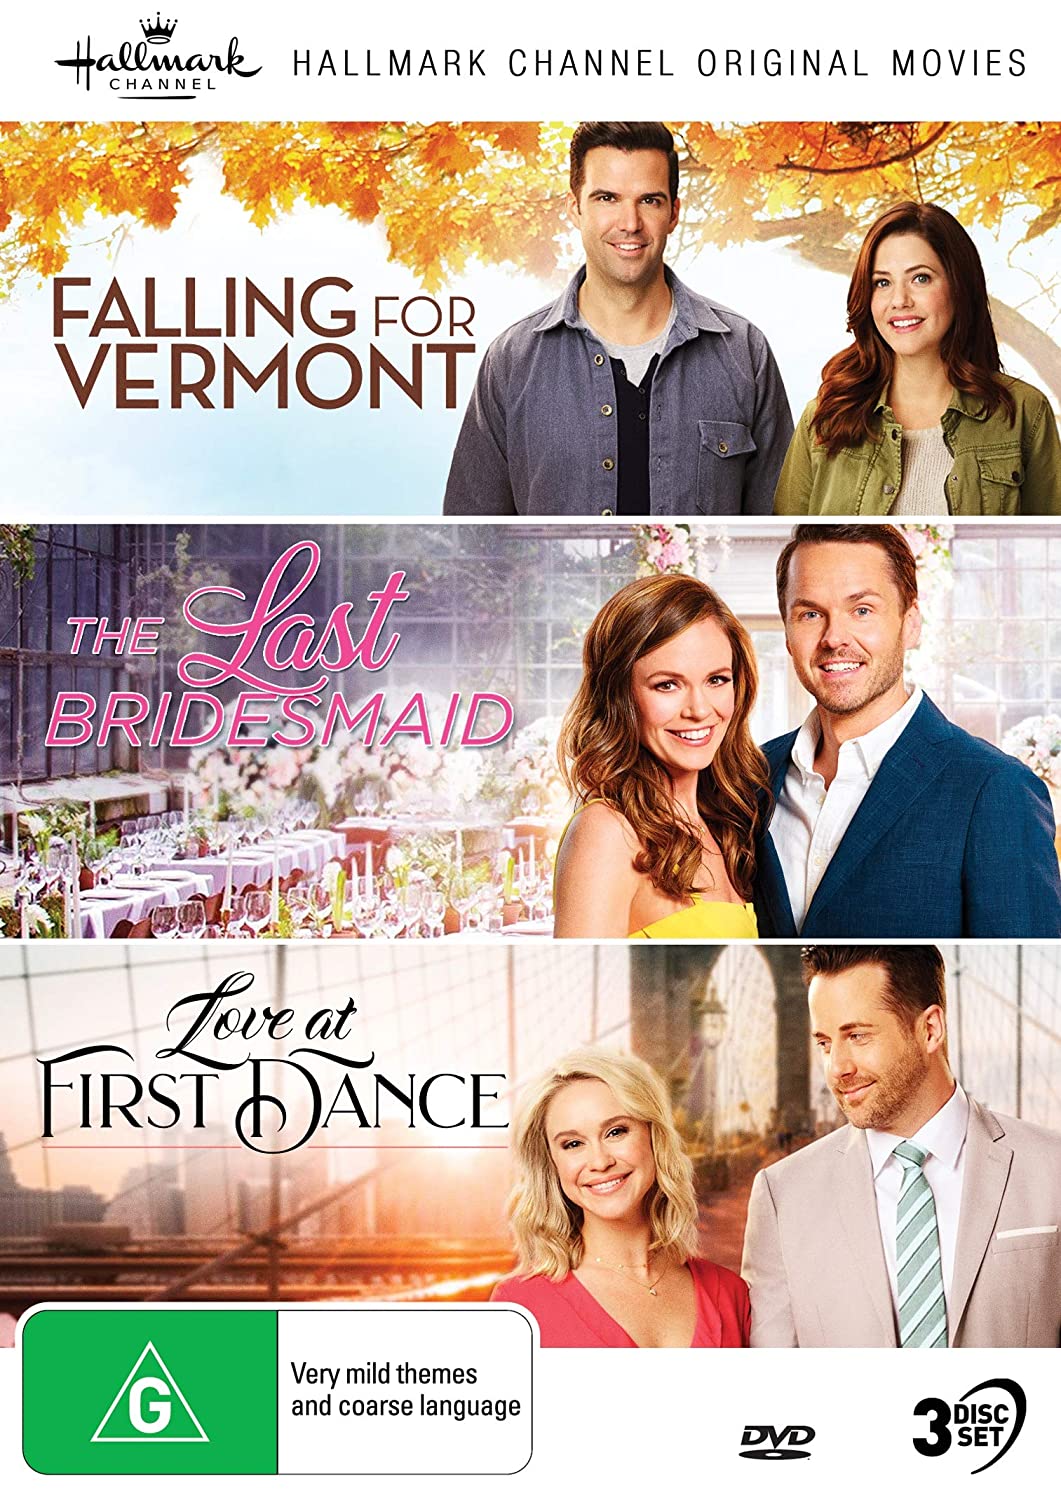 NEW on DVD Hallmark Channel Movie Collections including The Last